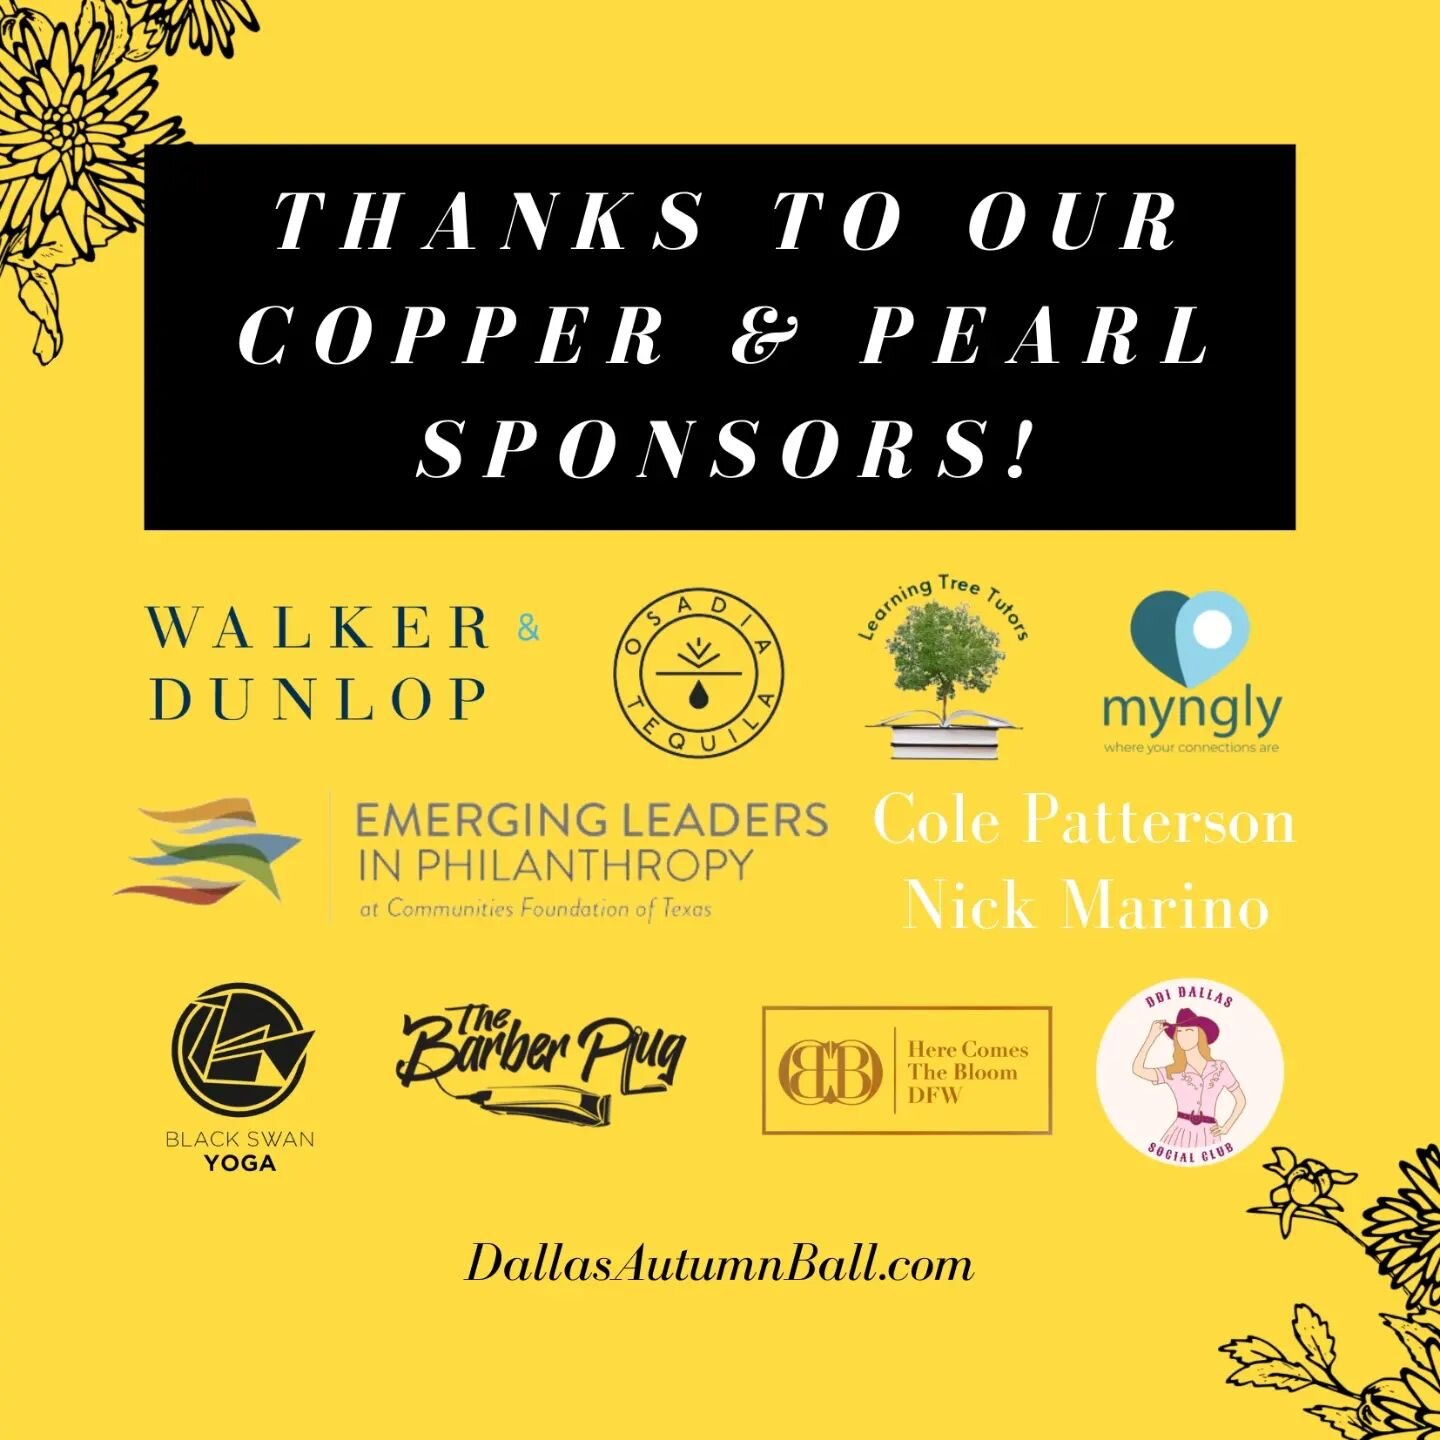 ✨ Today is the day! ✨

We're so grateful to the Copper and Pearl corporate sponsors that have made this night possible. 

See you all soon!